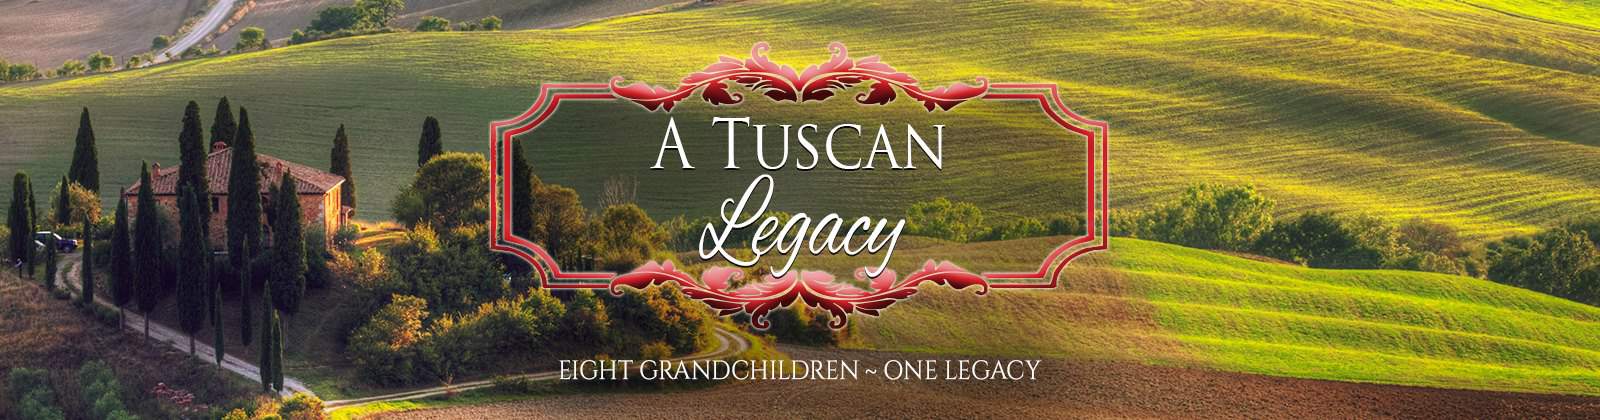 Image shows the hills of Tuscany, one of the international settings in the new multi-author series A Tuscan Legacy 